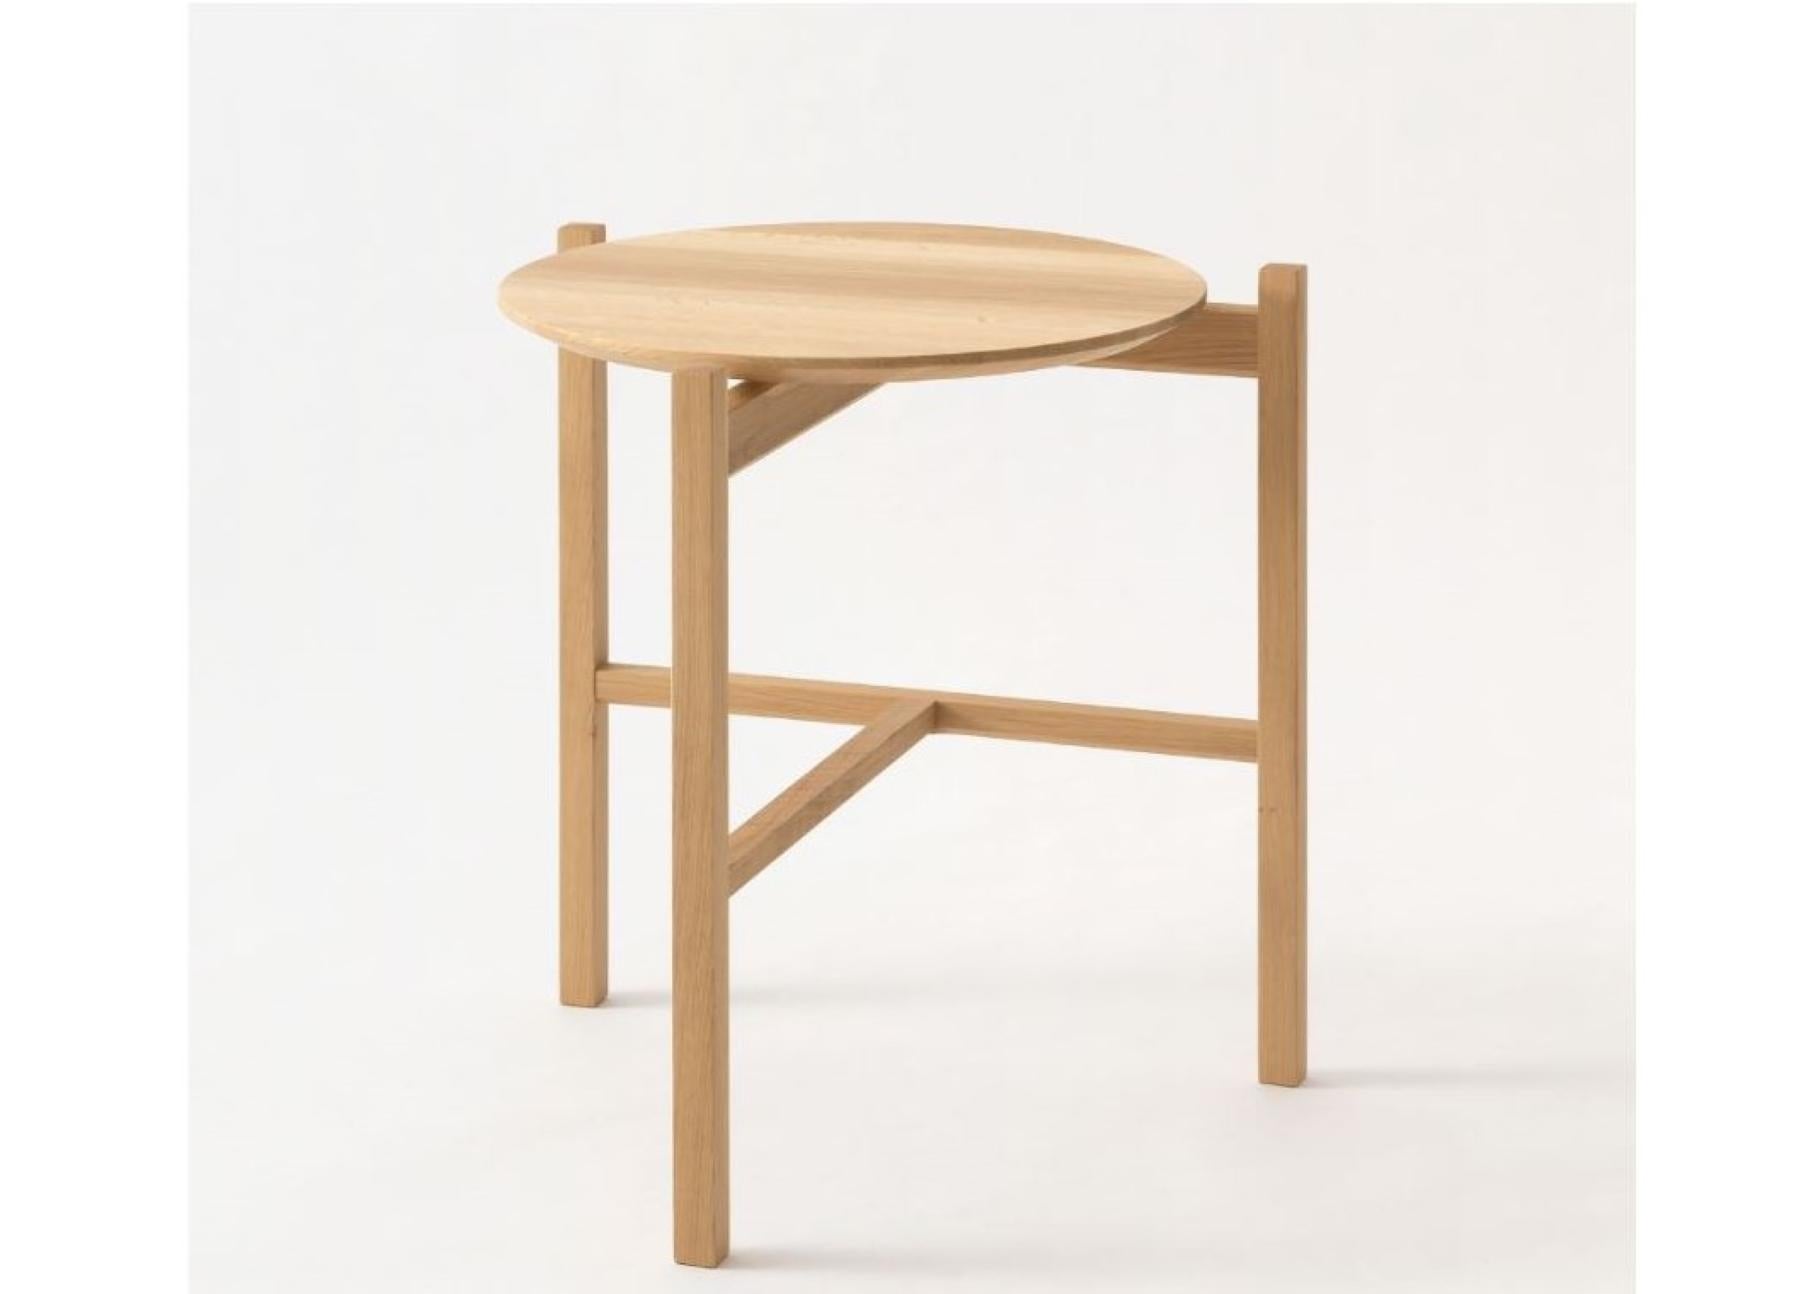 A truly beautiful hand crafted Occasional Side Table by HIDA Japan.  The Suwari series is designed with an awareness of vertical flow, blending naturally into both Japanese and modern architectural spaces, and enhancing them.
The perfectly weighted